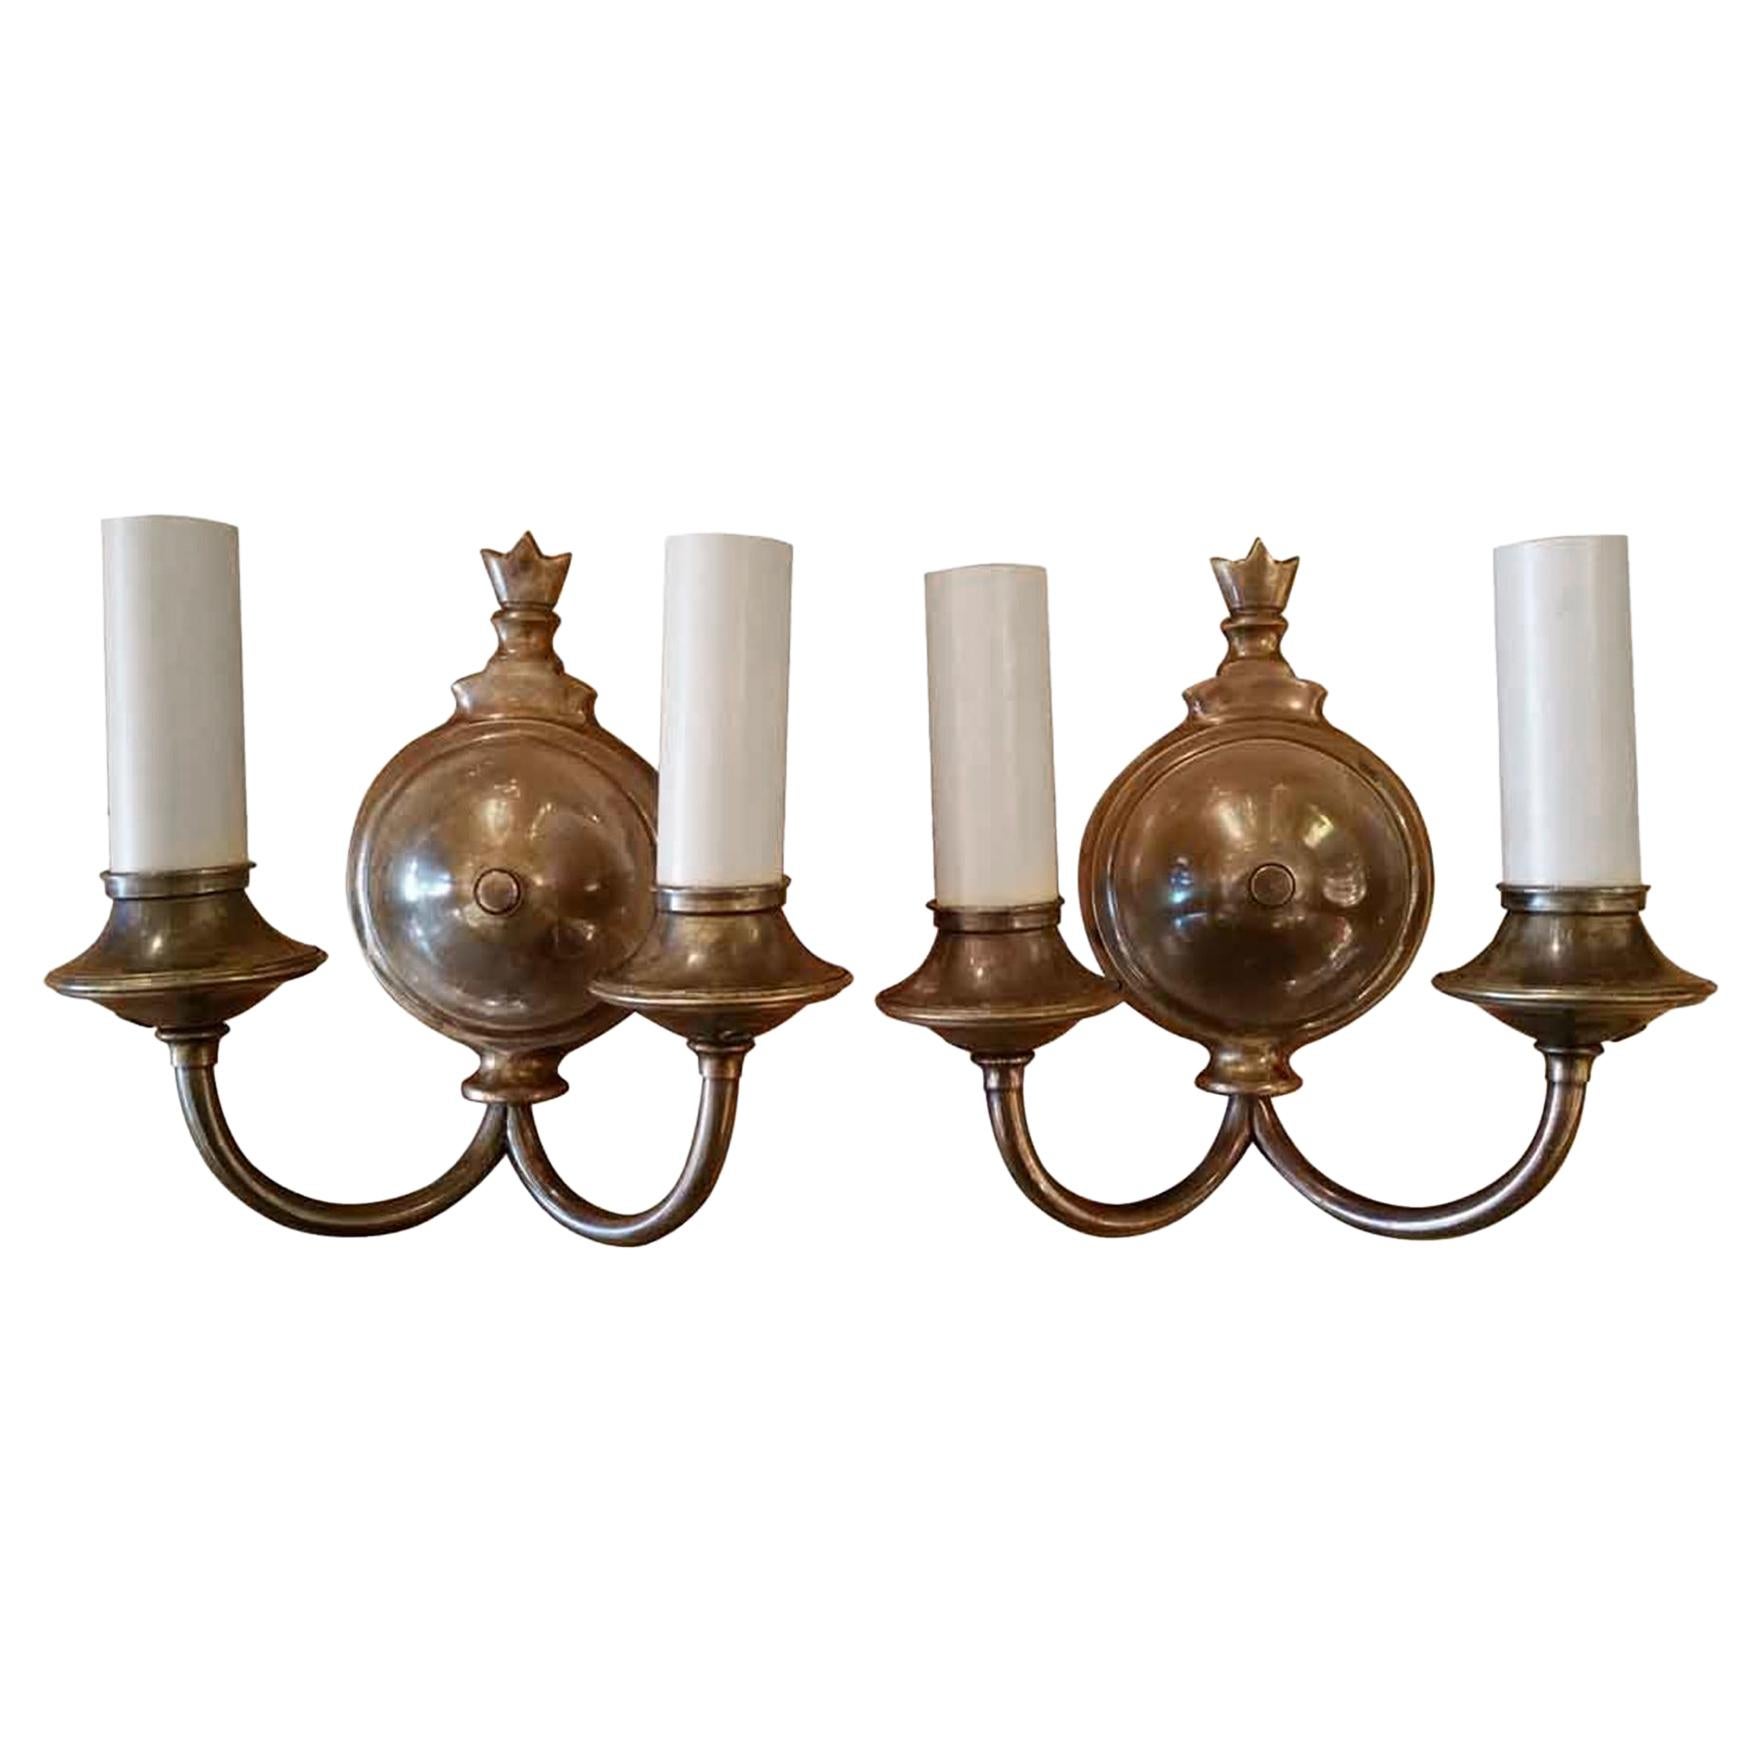 1920s Pair of Two-Arm Antique Brass Finish Sconces